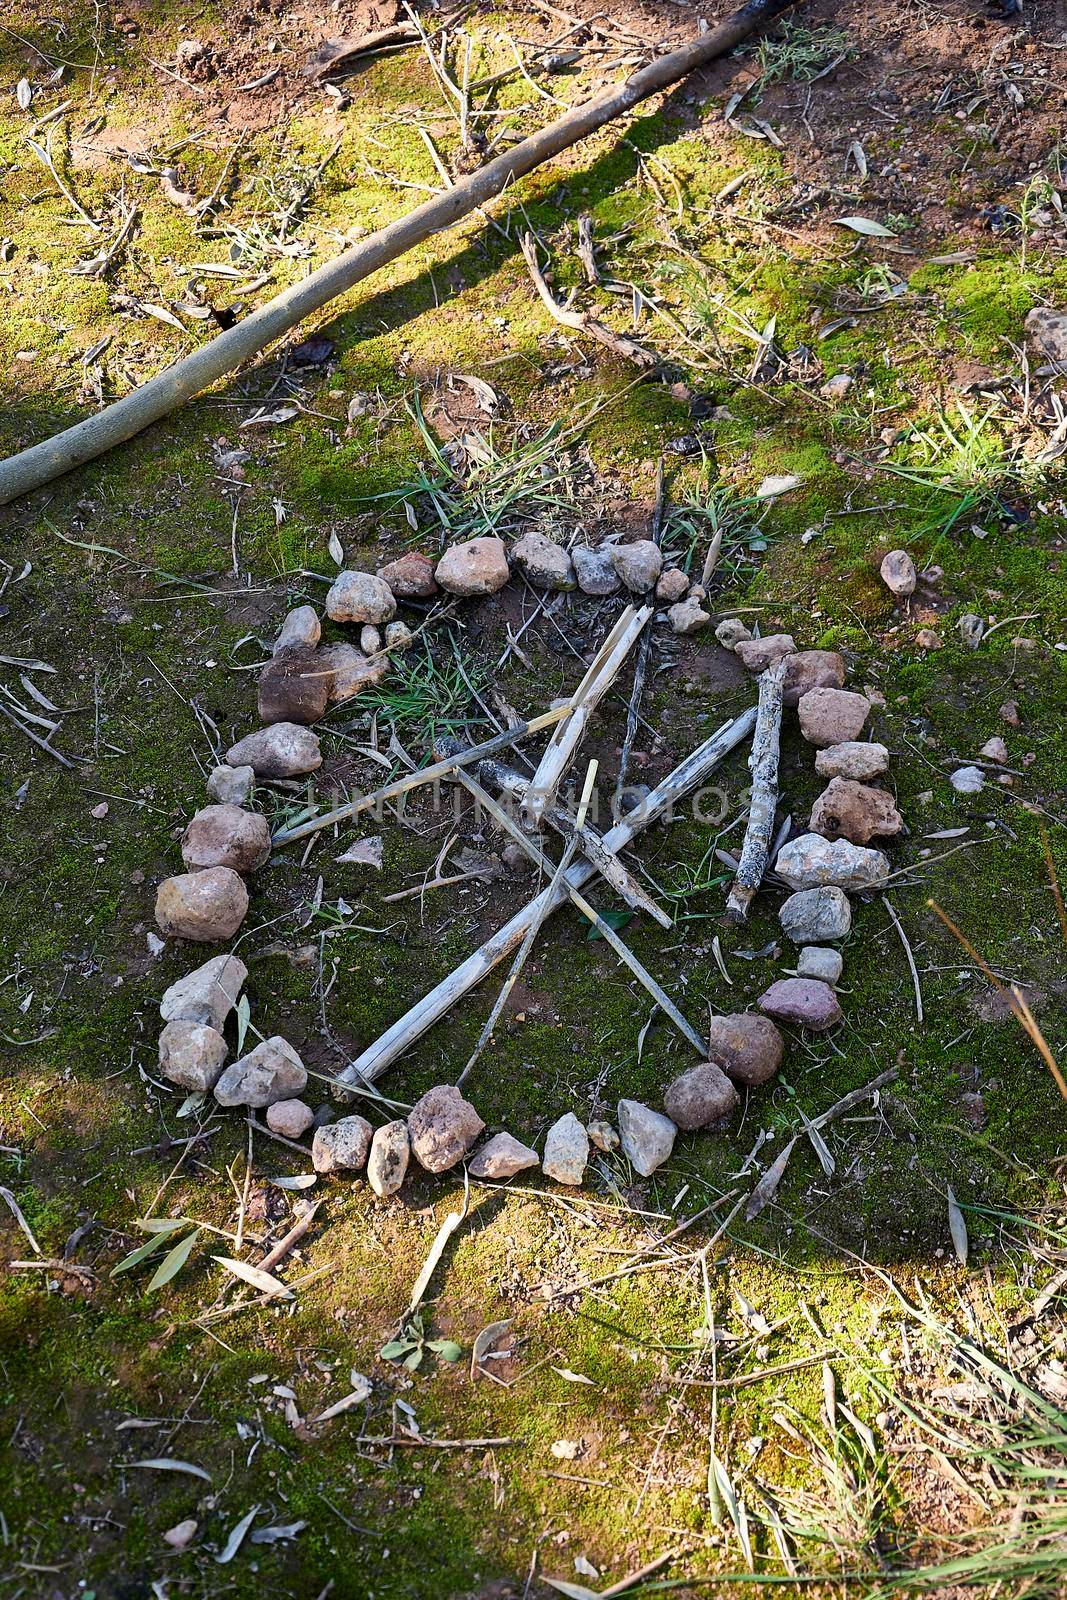 Circle of stones, with wooden sticks inside by raul_ruiz